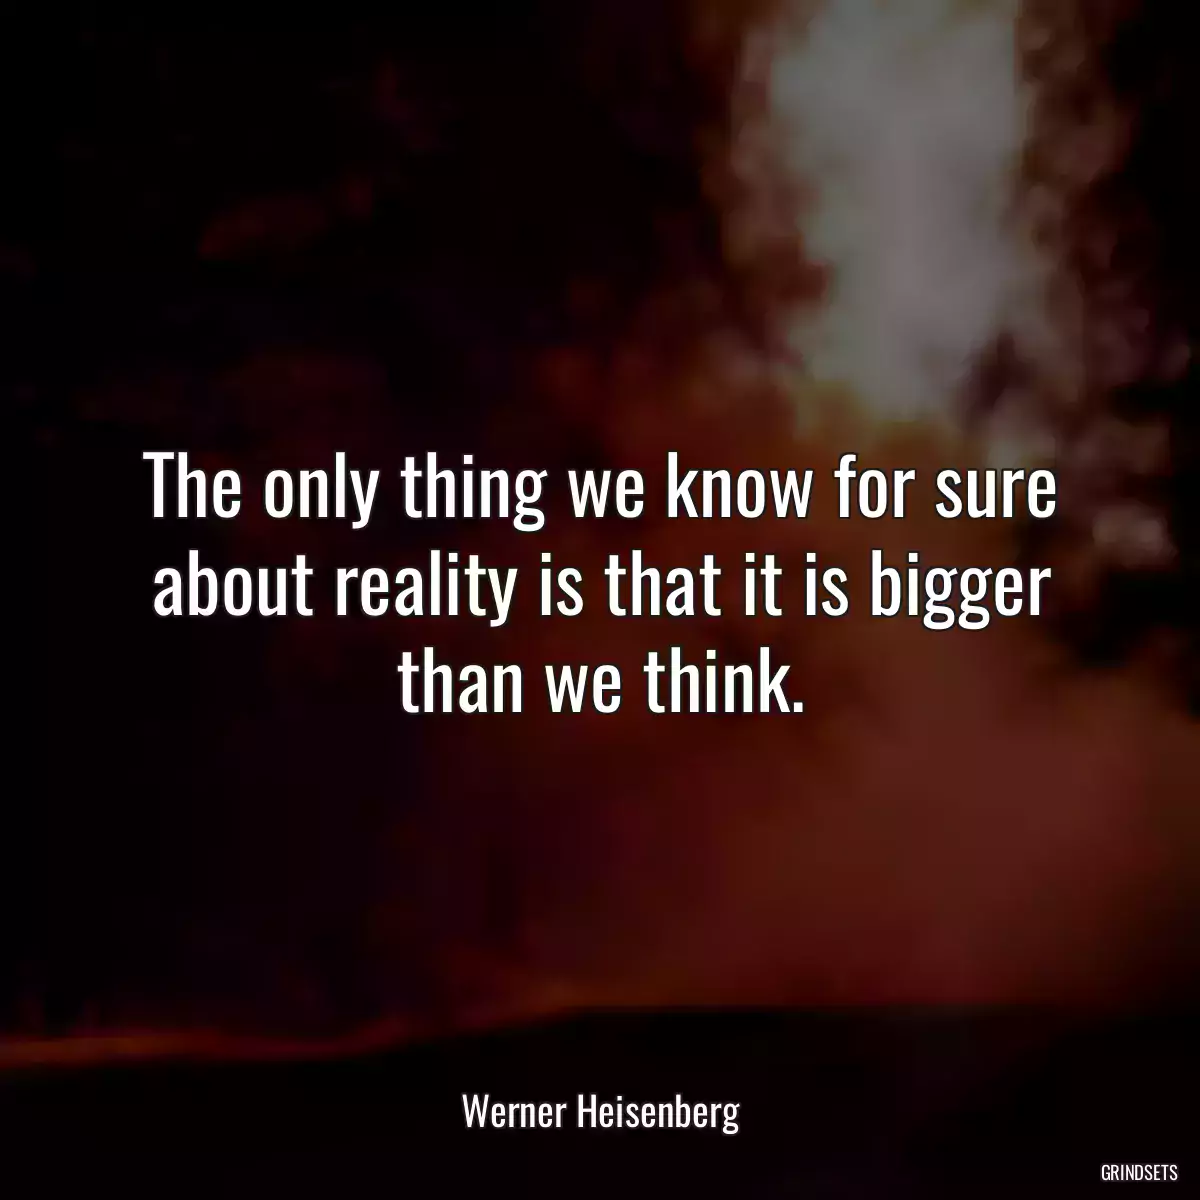 The only thing we know for sure about reality is that it is bigger than we think.